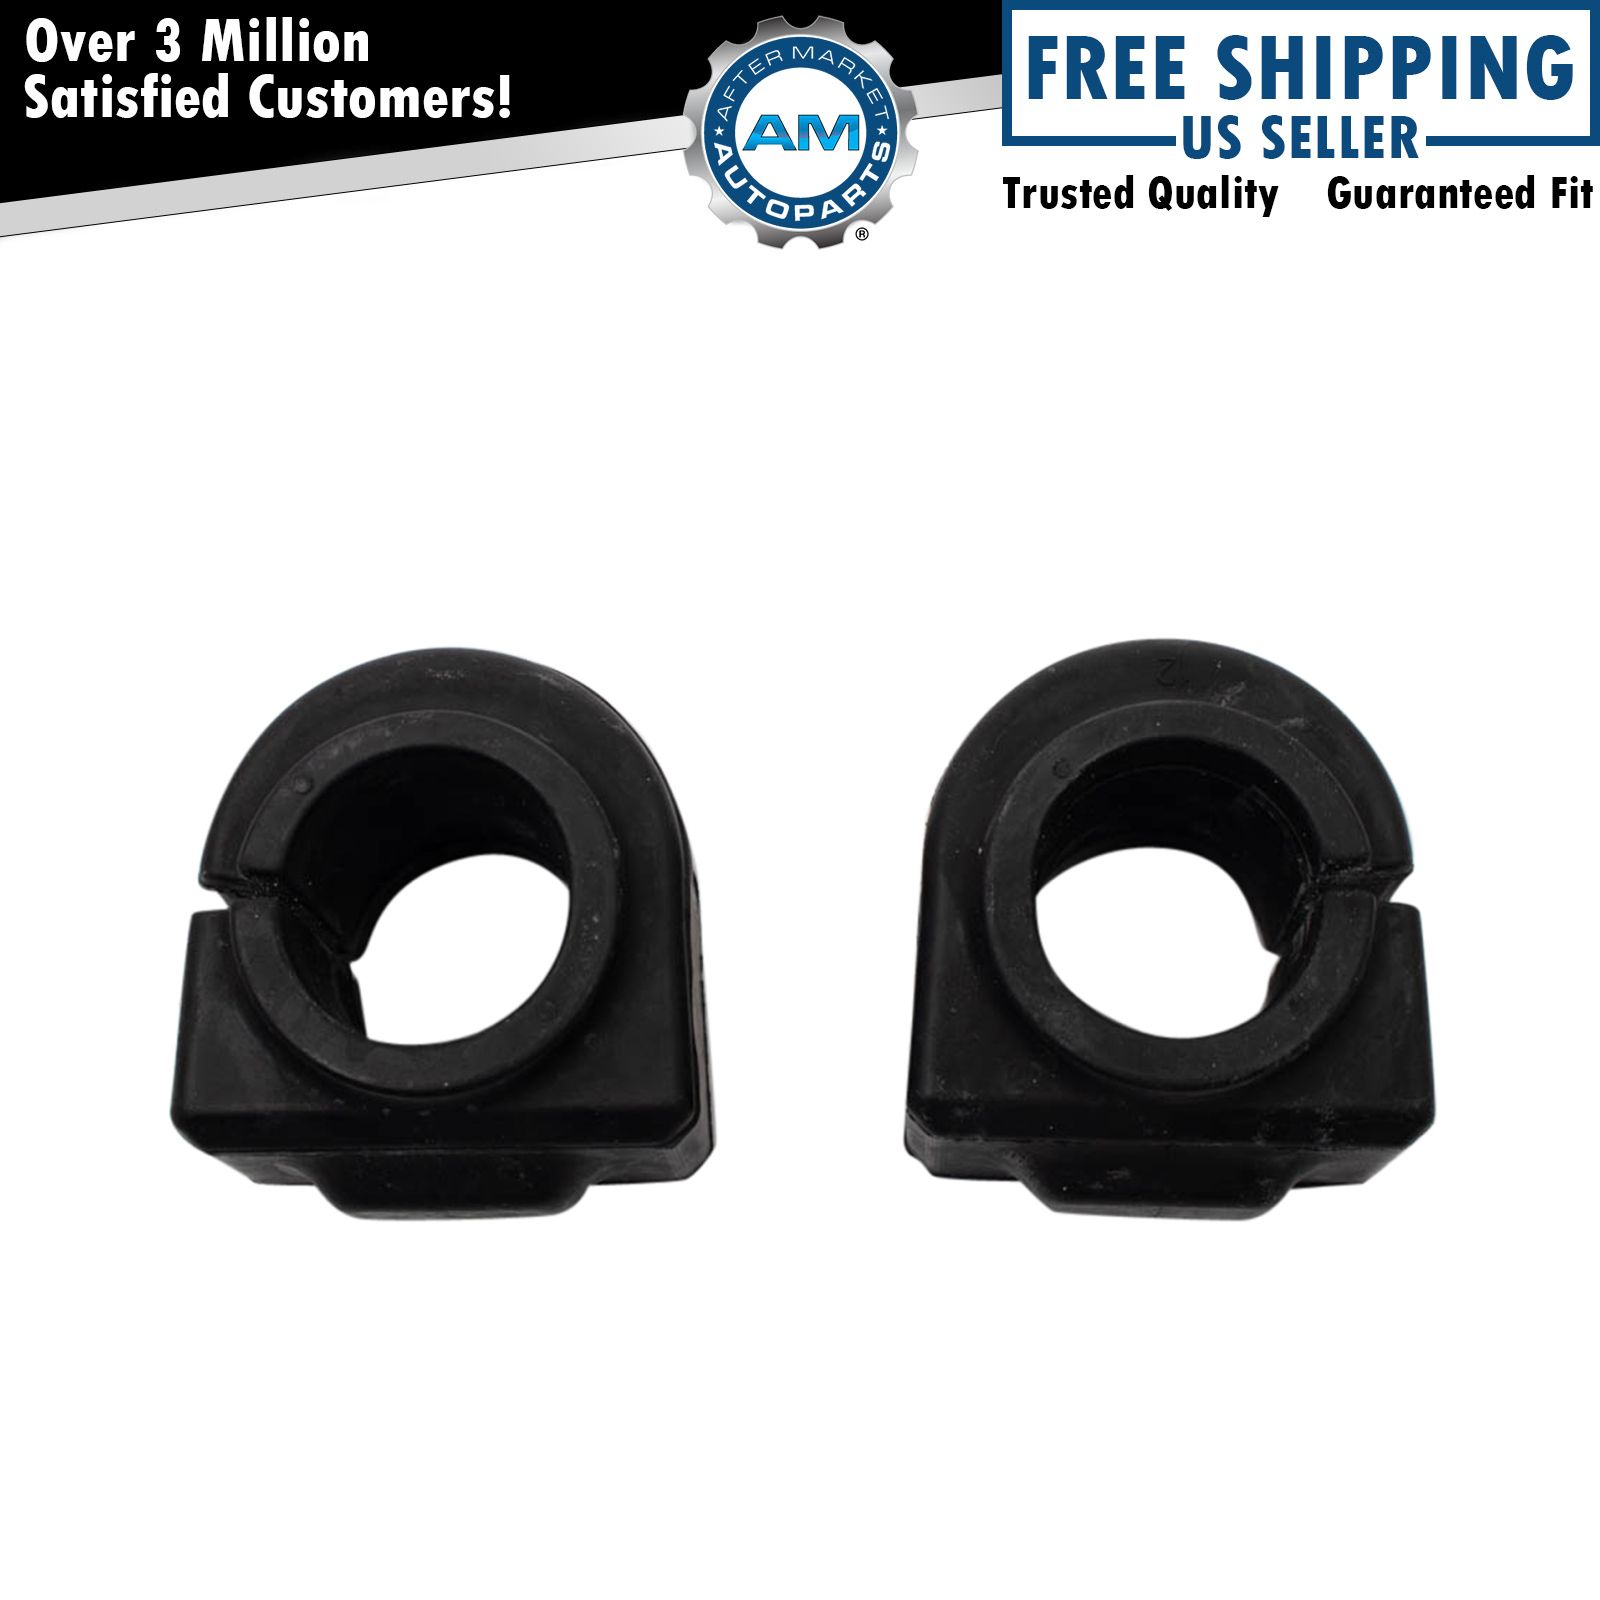 Front Sway Bar Bushing Fits Buick Enclave Chevrolet Traverse GMC Acadia Outlook